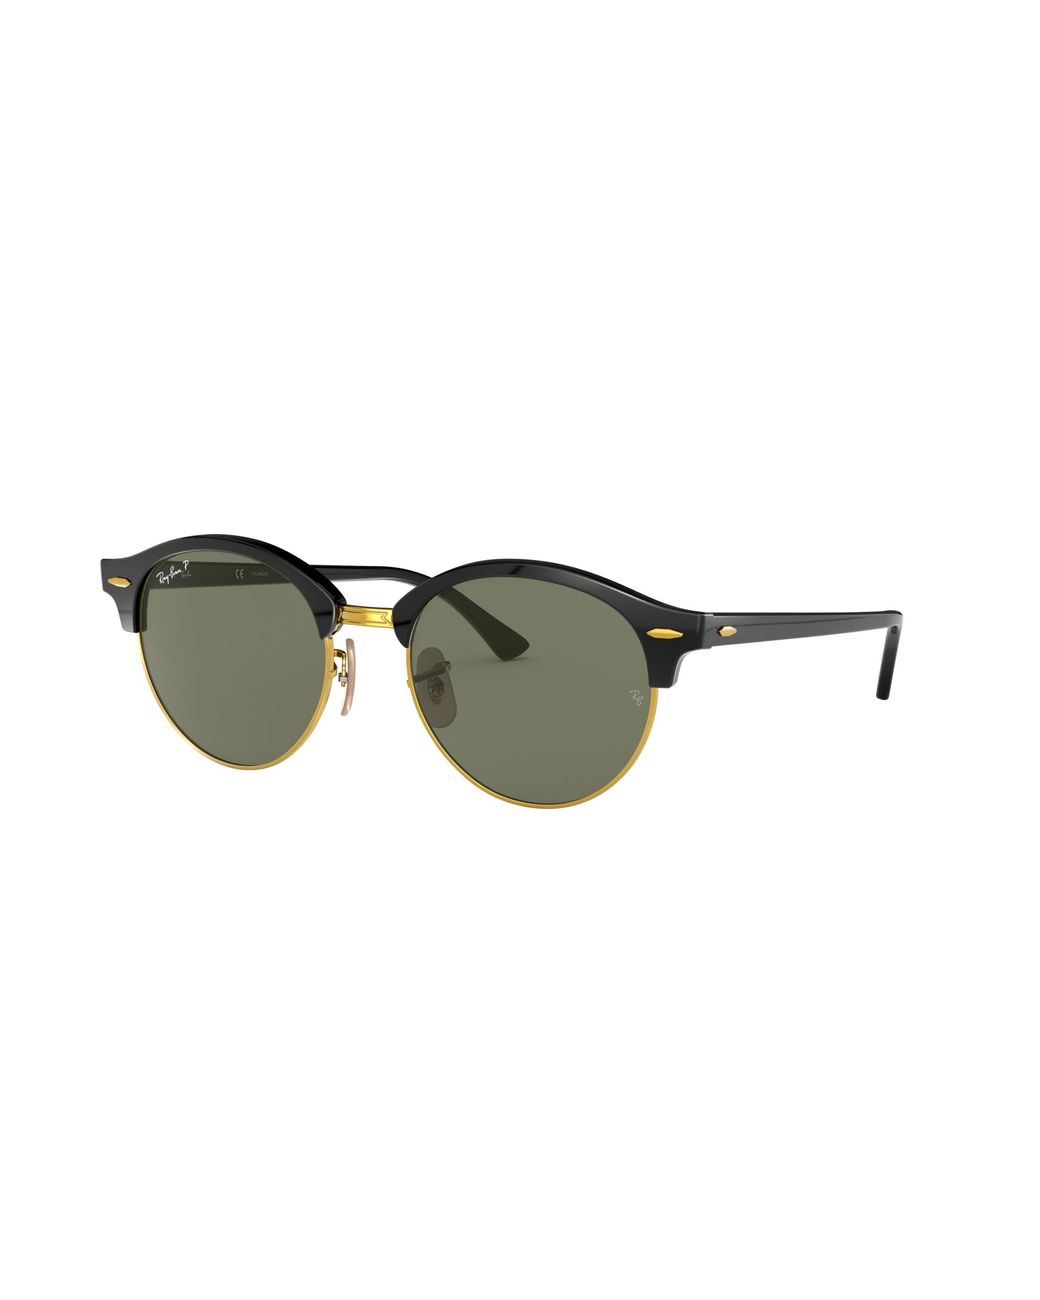 Ray Ban Polarized Sunglasses Rb4246 Clubround In Green Save 14 Lyst